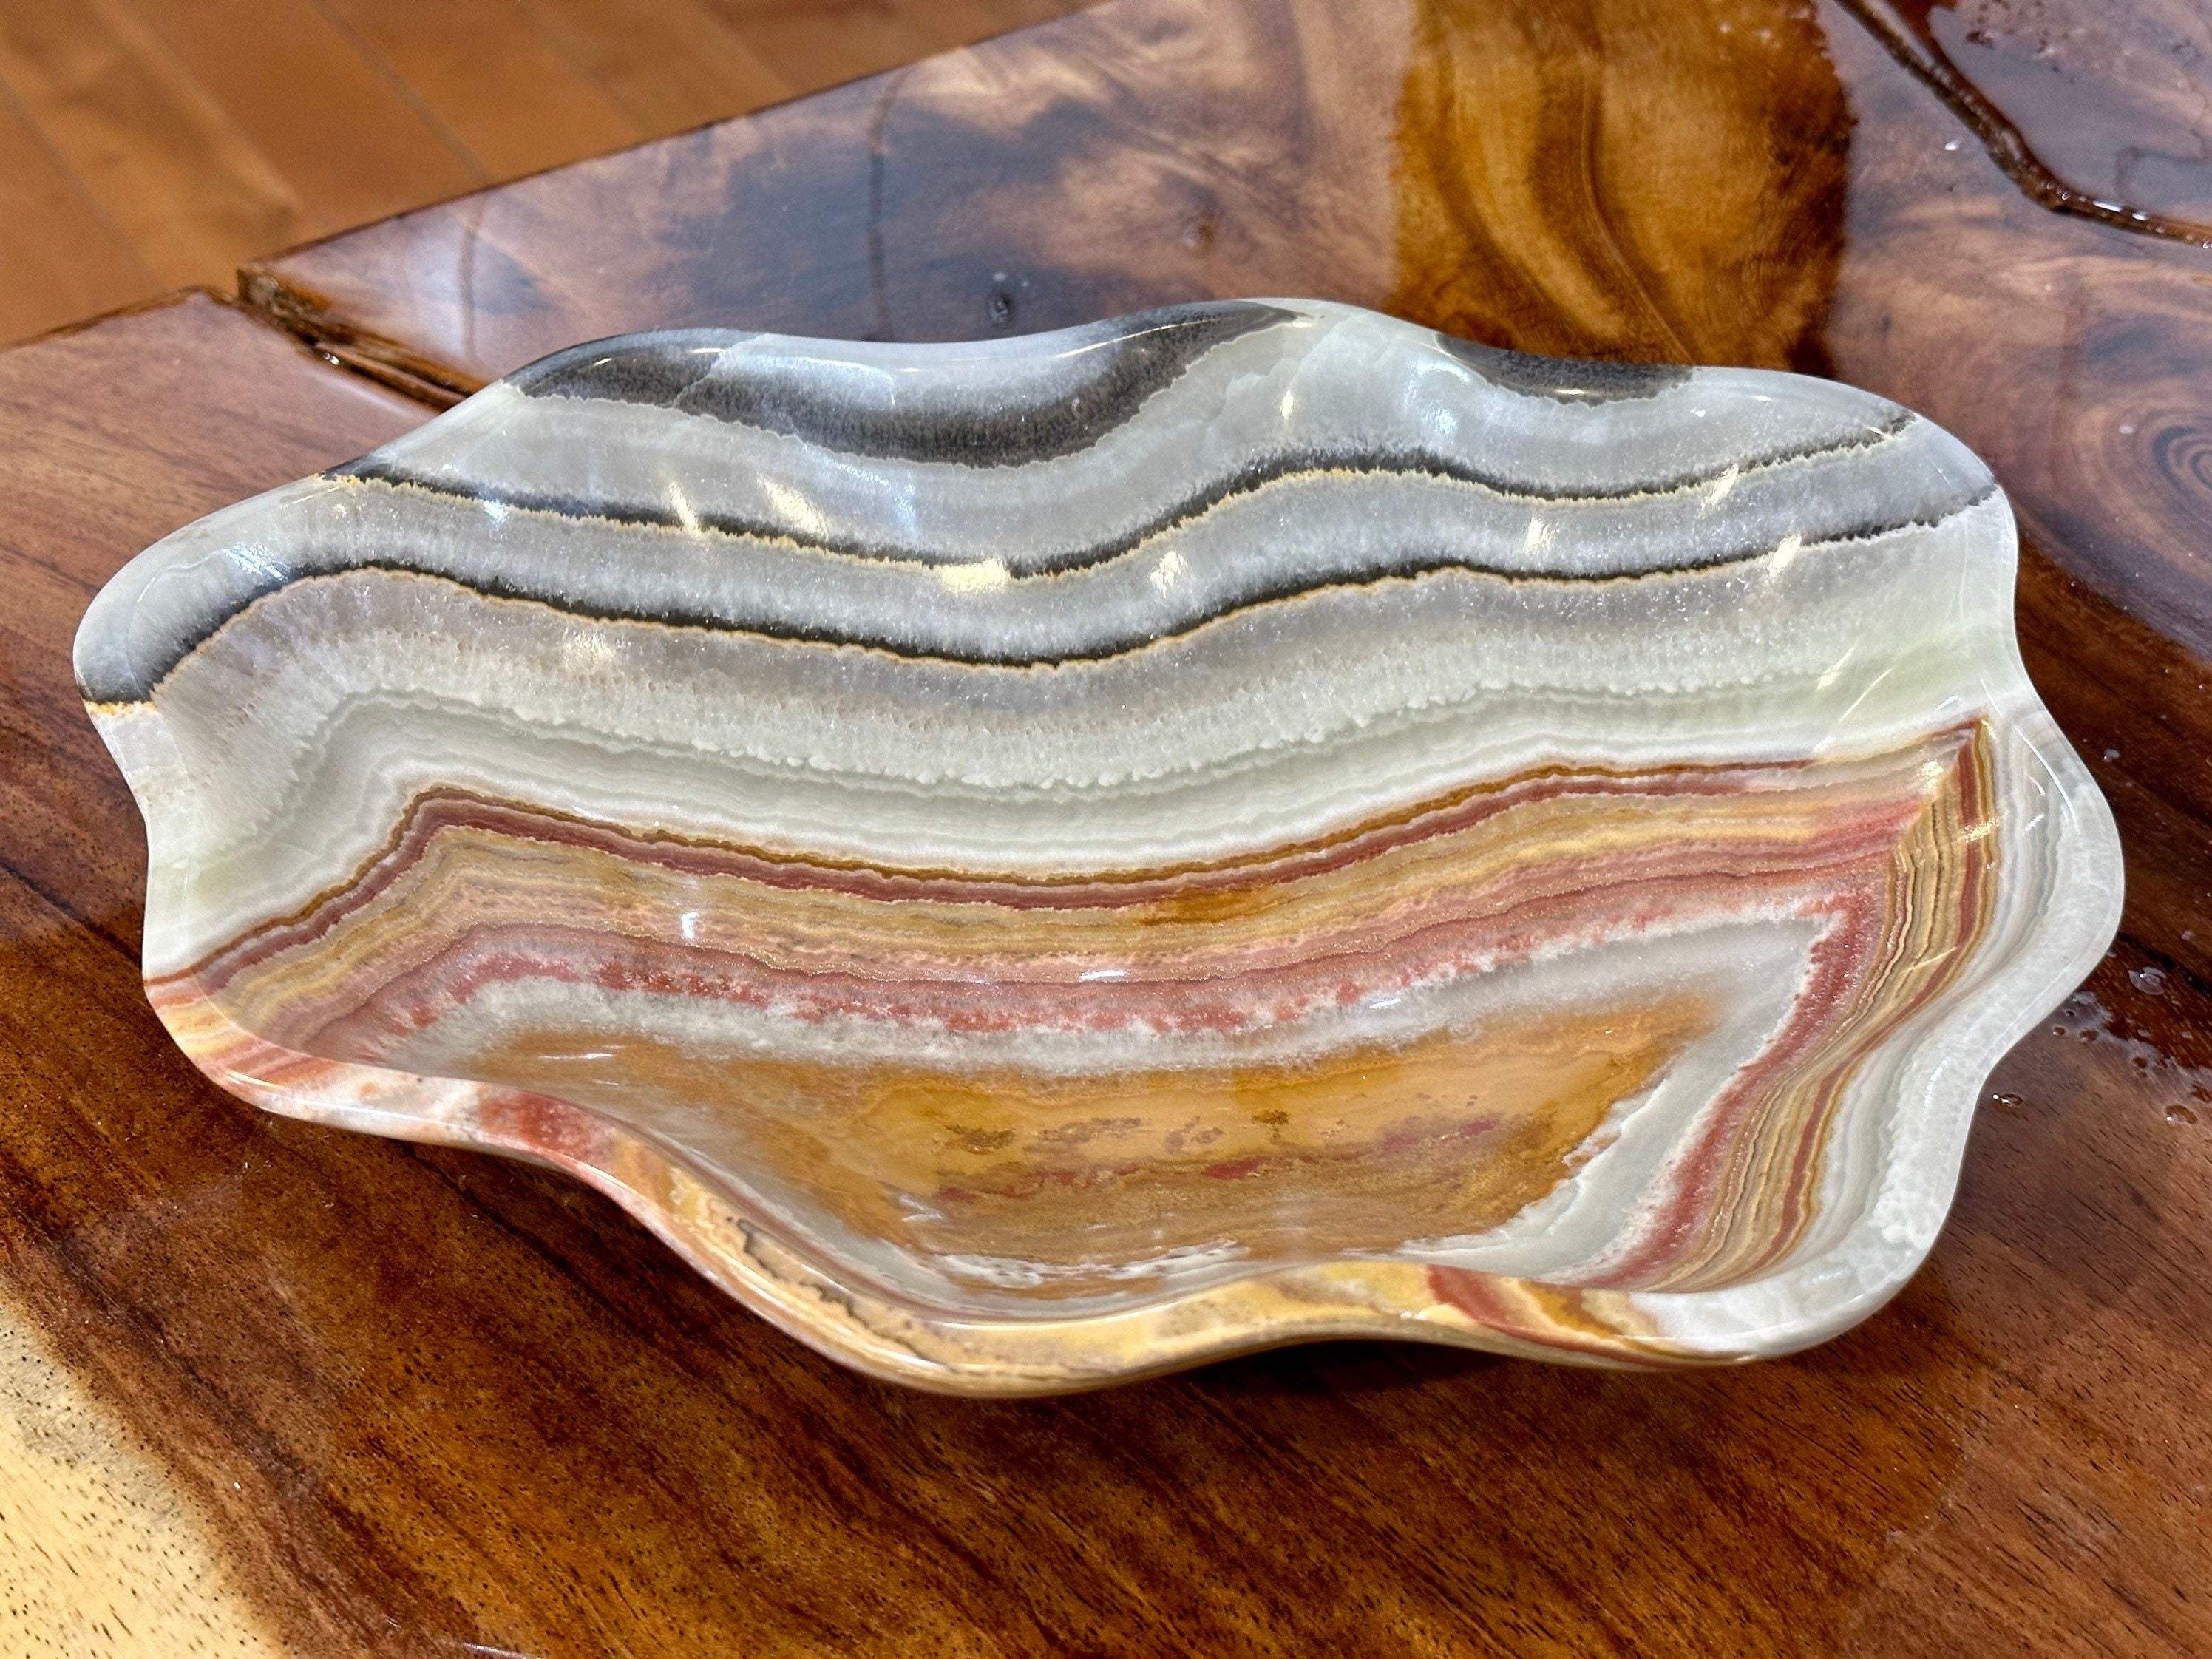 Artful Home Decor: Onyx Bowl - Handcrafted Glass Bowl with Swirling Colors - One of a Kind Centerpiece